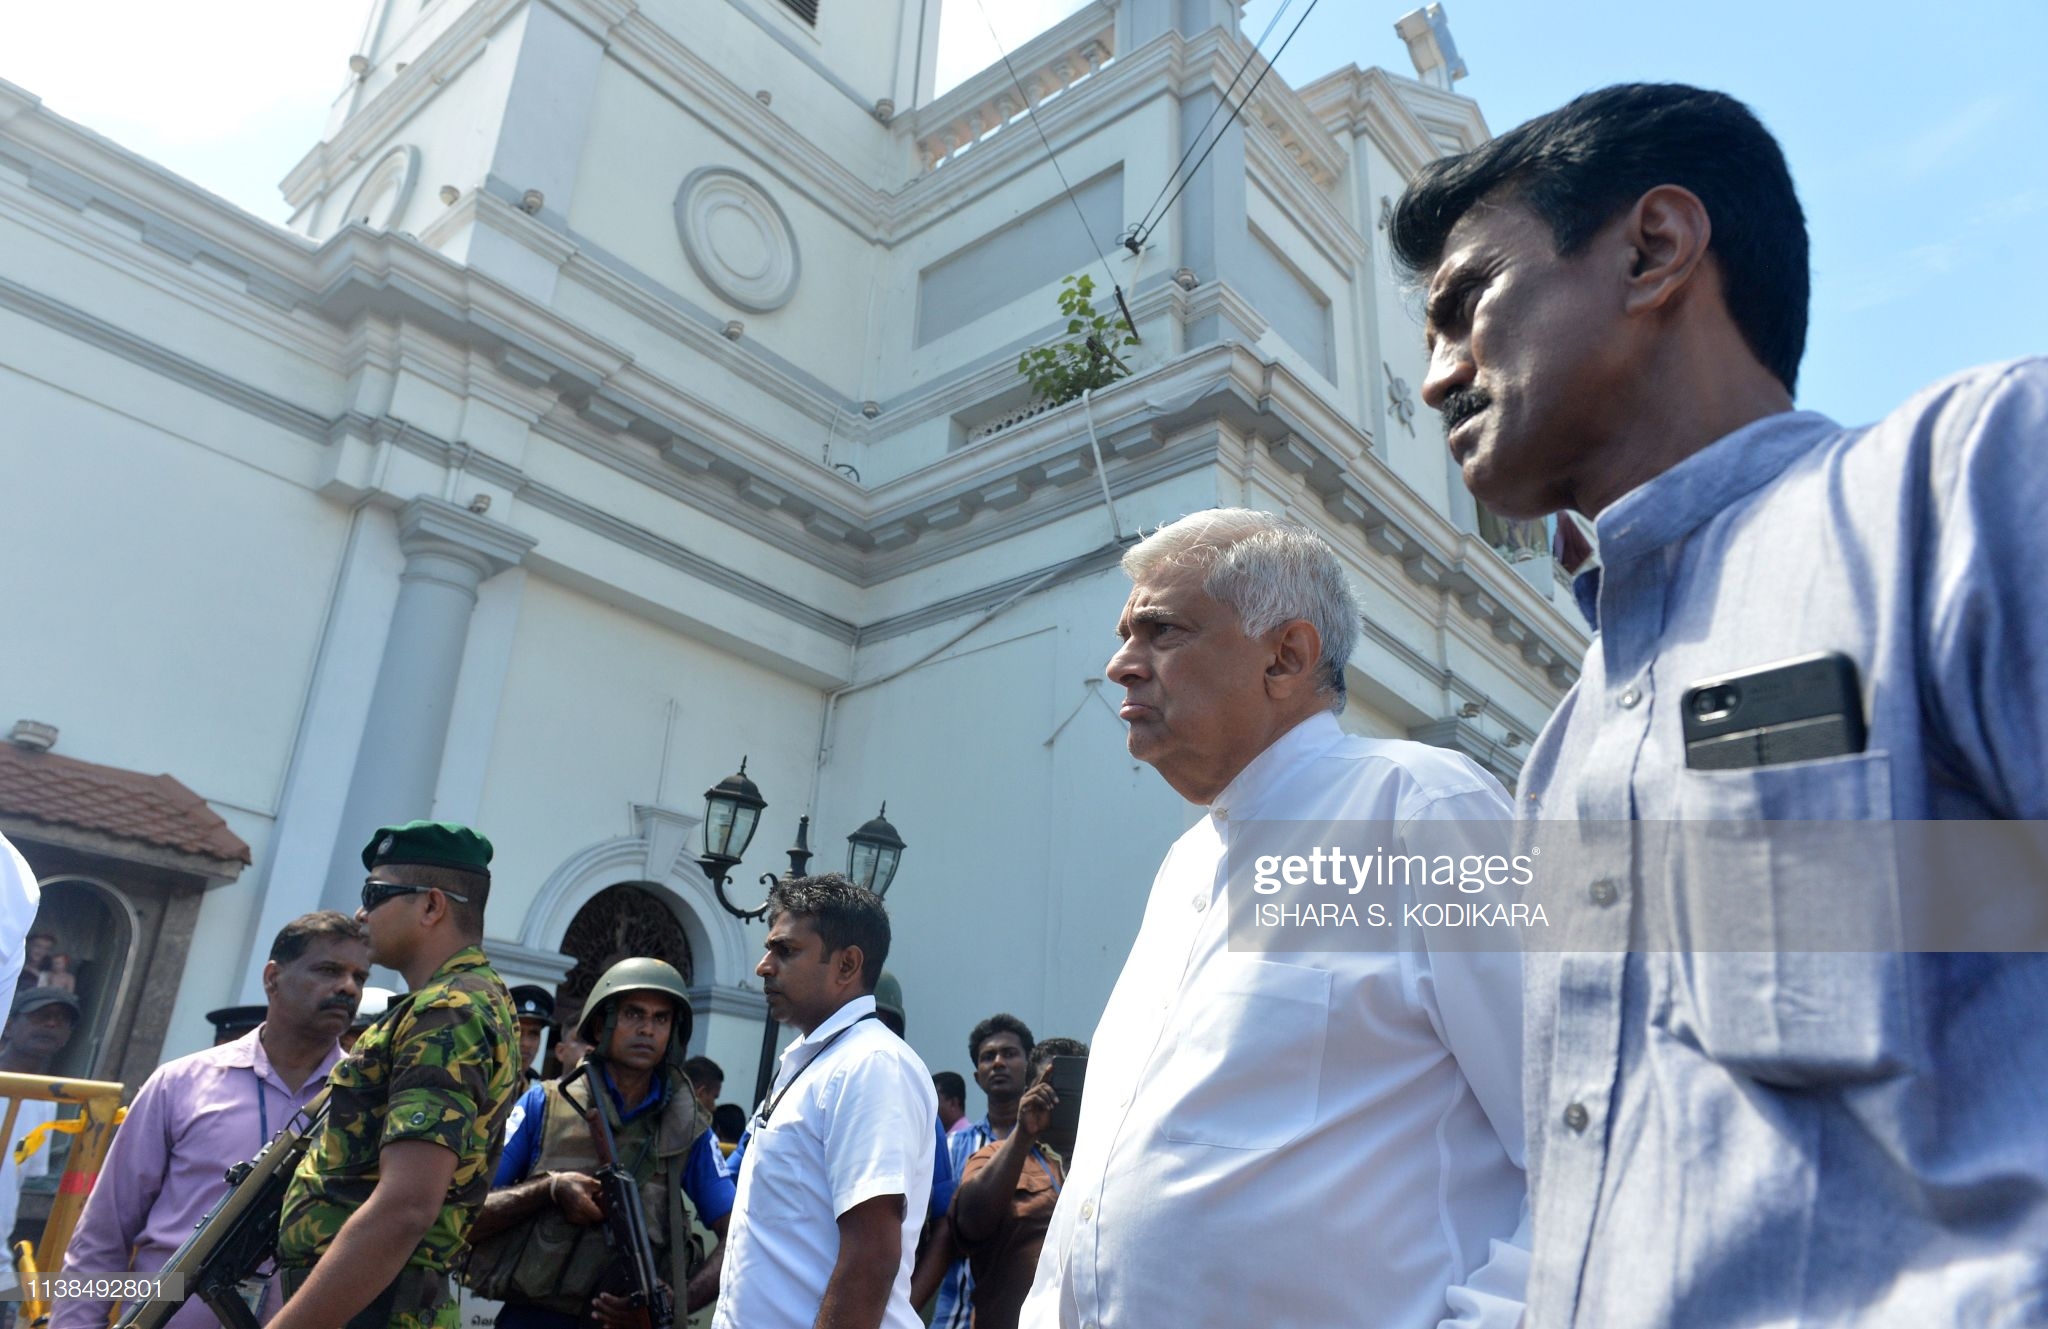 Opinion: The demise of Ranil Wickremesinghe is highly exaggerated